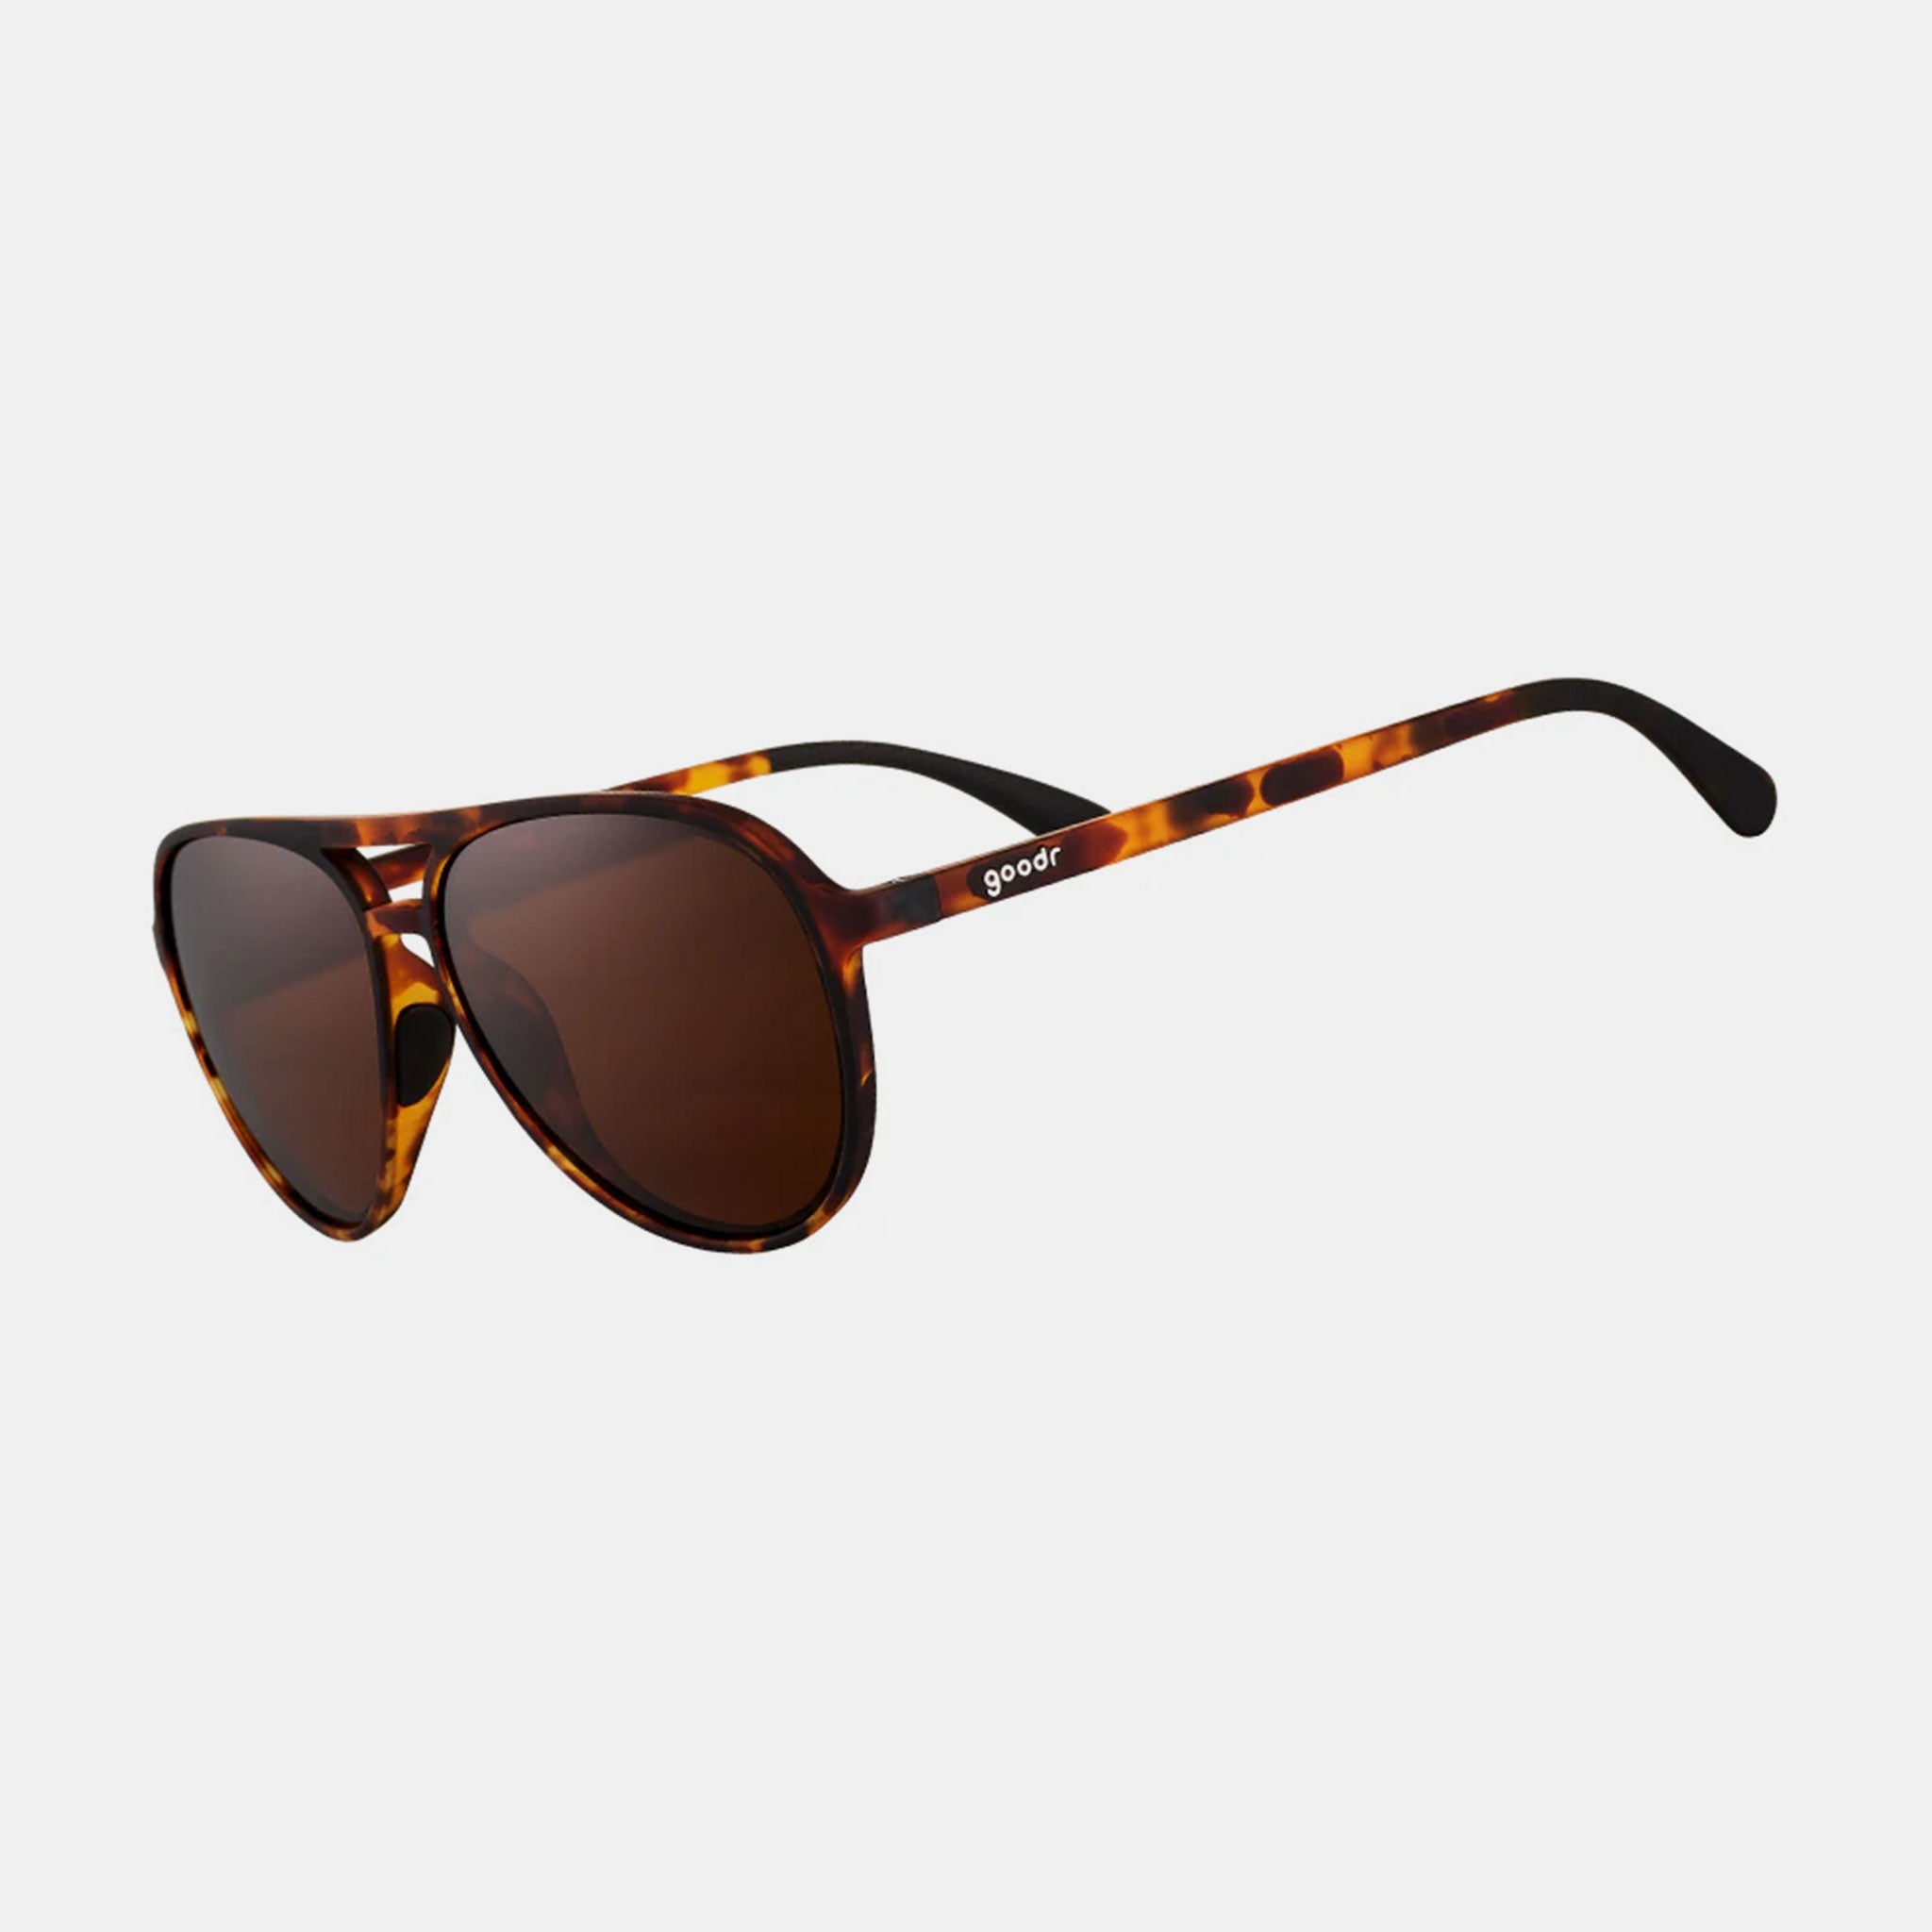 Goodr Sunglasses - Amelia Earhart Ghosted Me